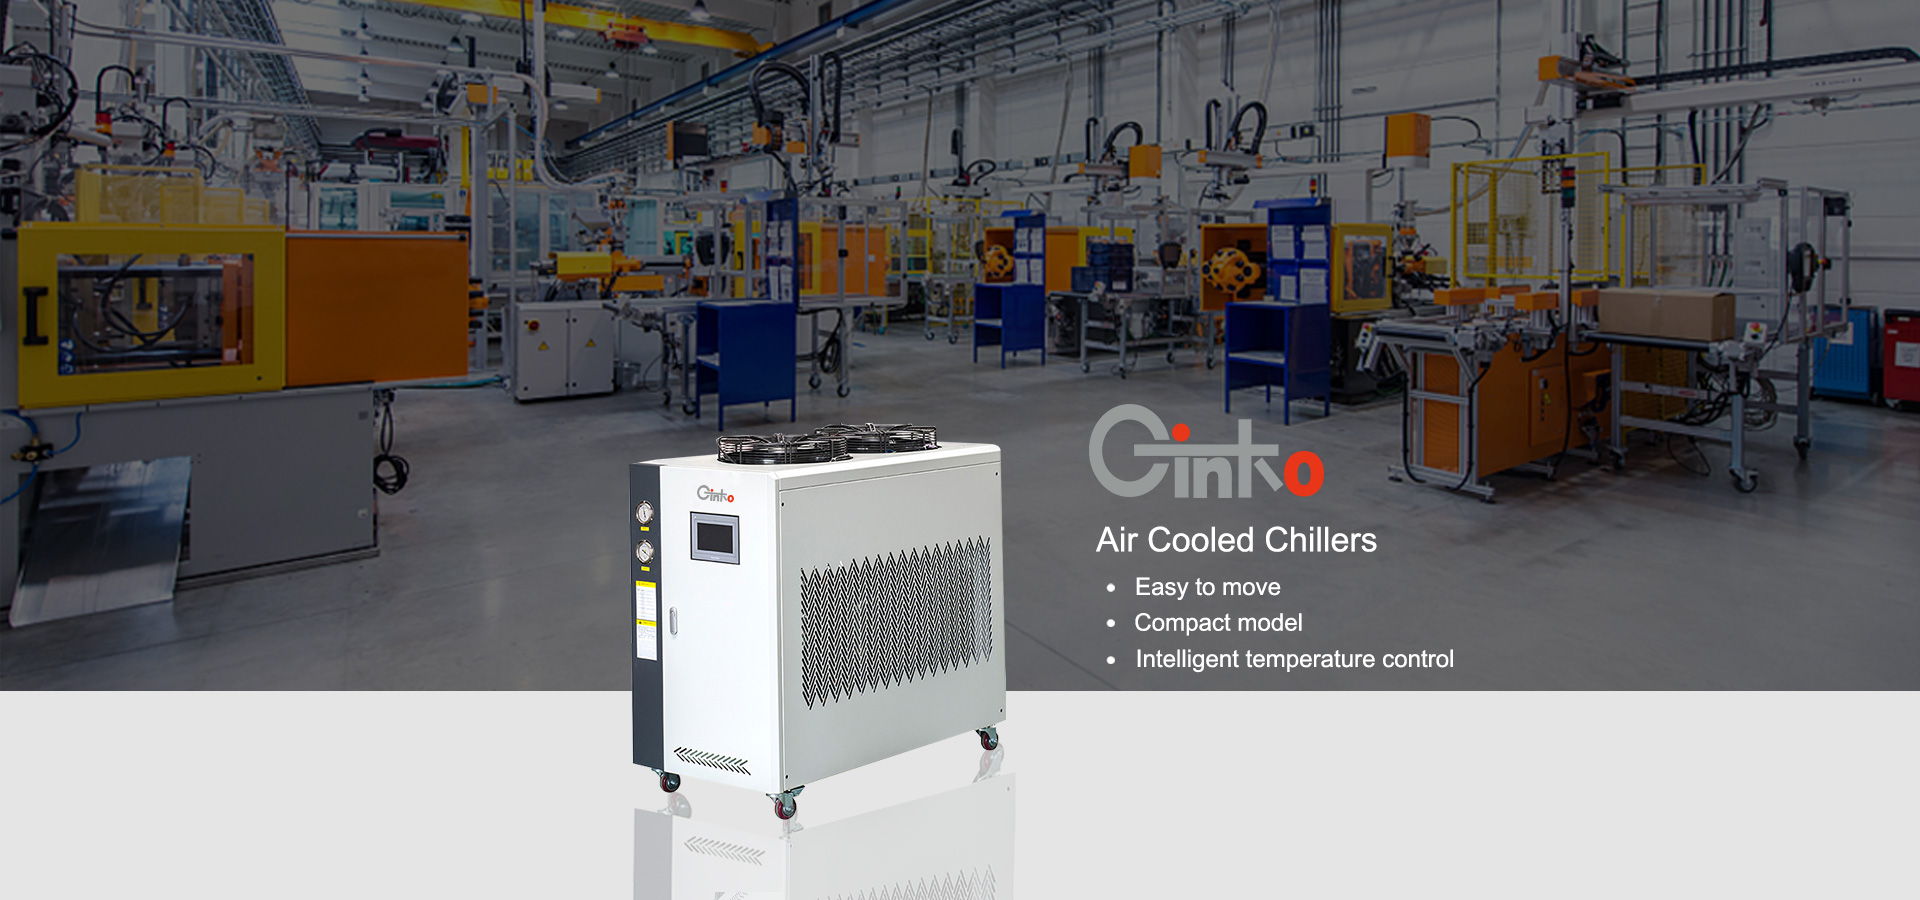 Ginko Air Cooled Chillers